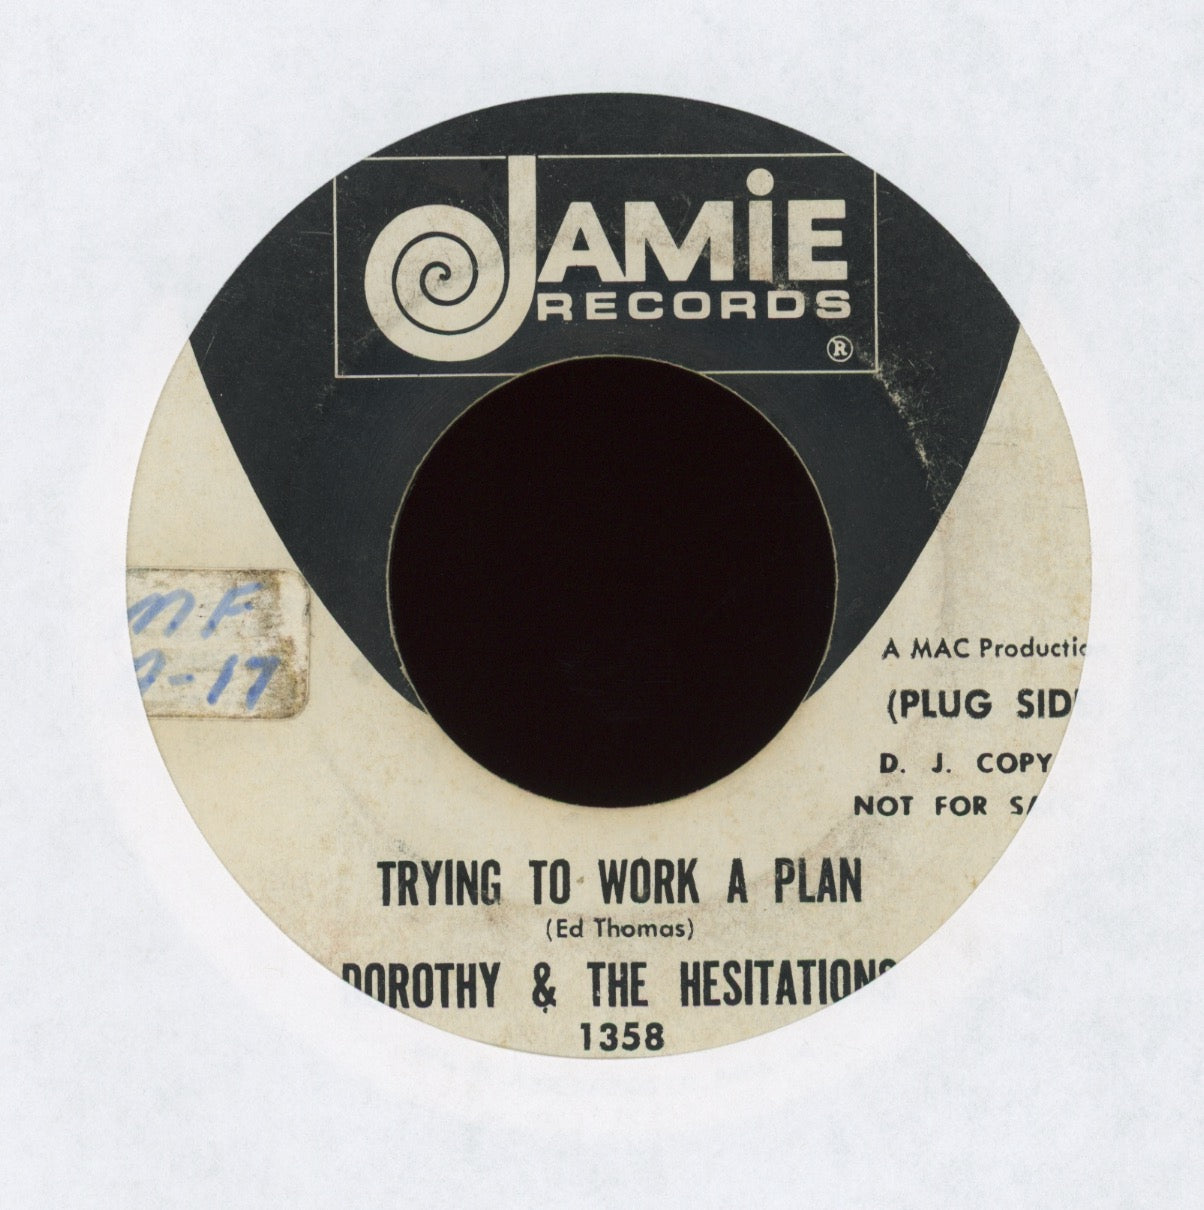 Dorothy & The Hesitations - Trying To Work A Plan on Jamie Promo Northern Soul 45